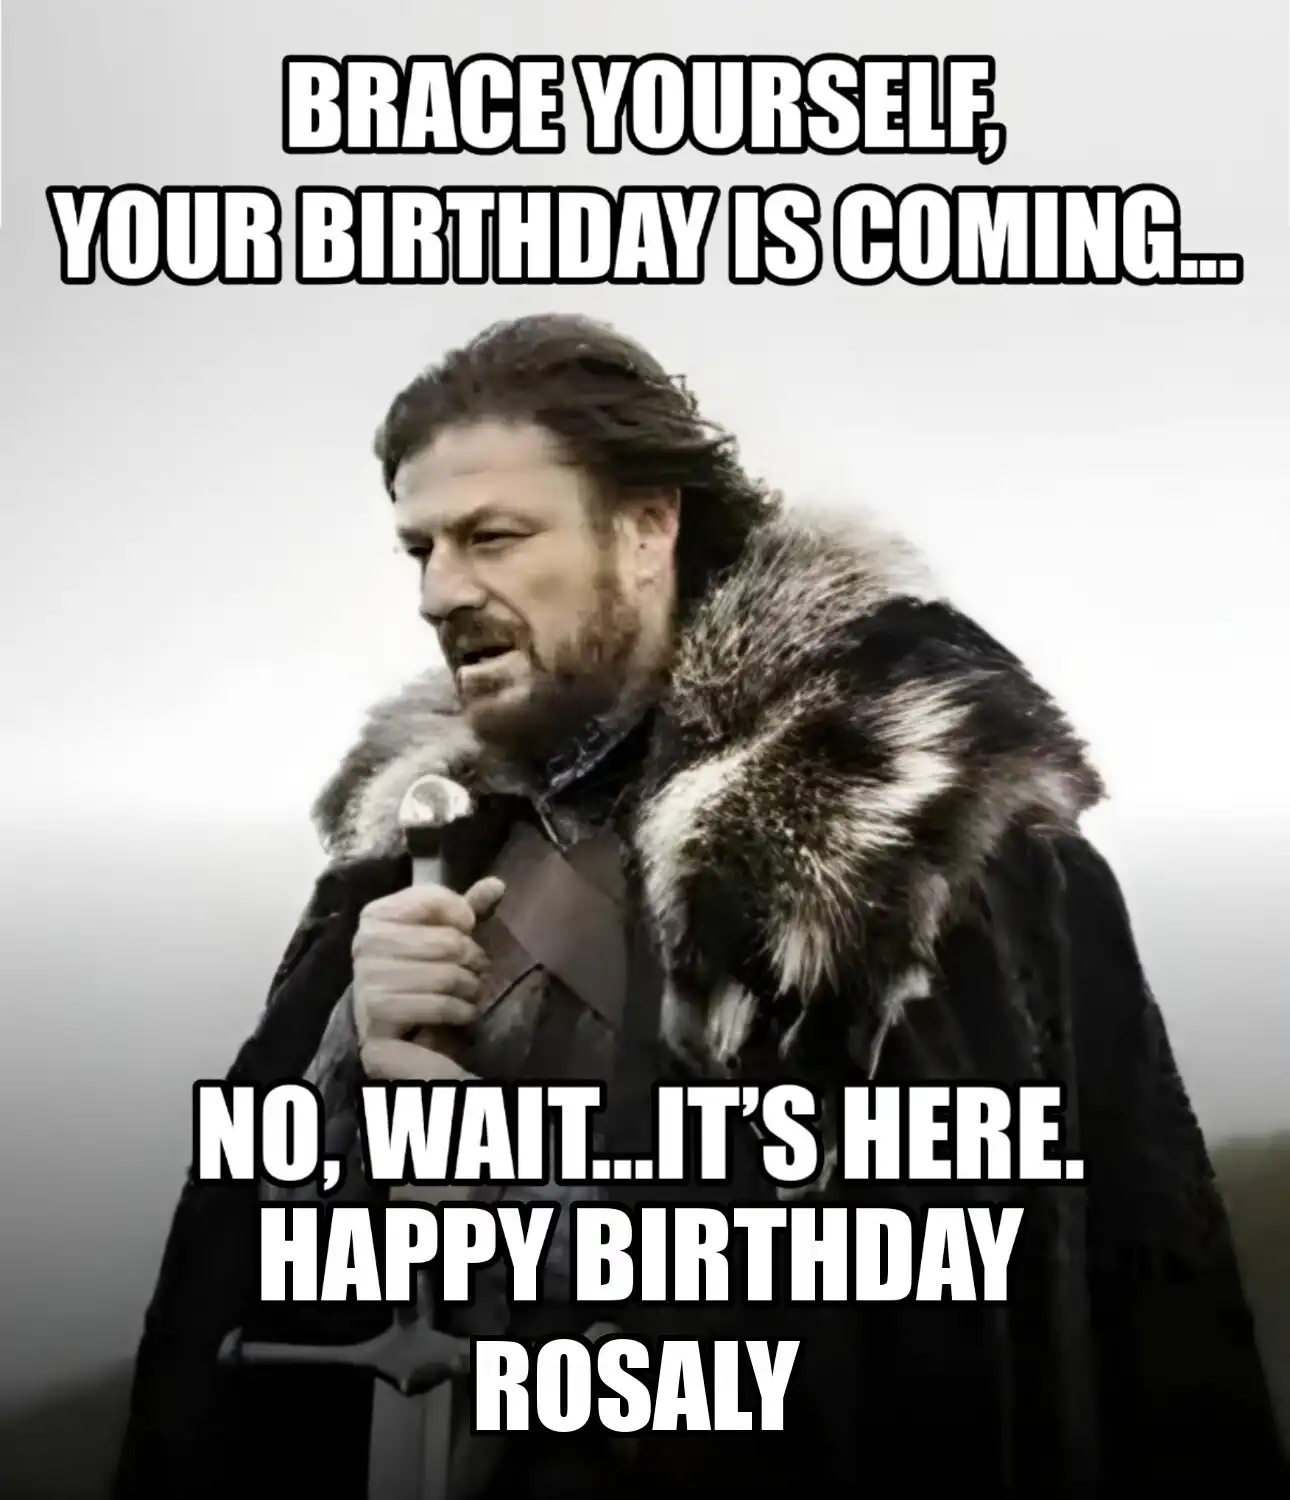 Happy Birthday Rosaly Brace Yourself Your Birthday Is Coming Meme